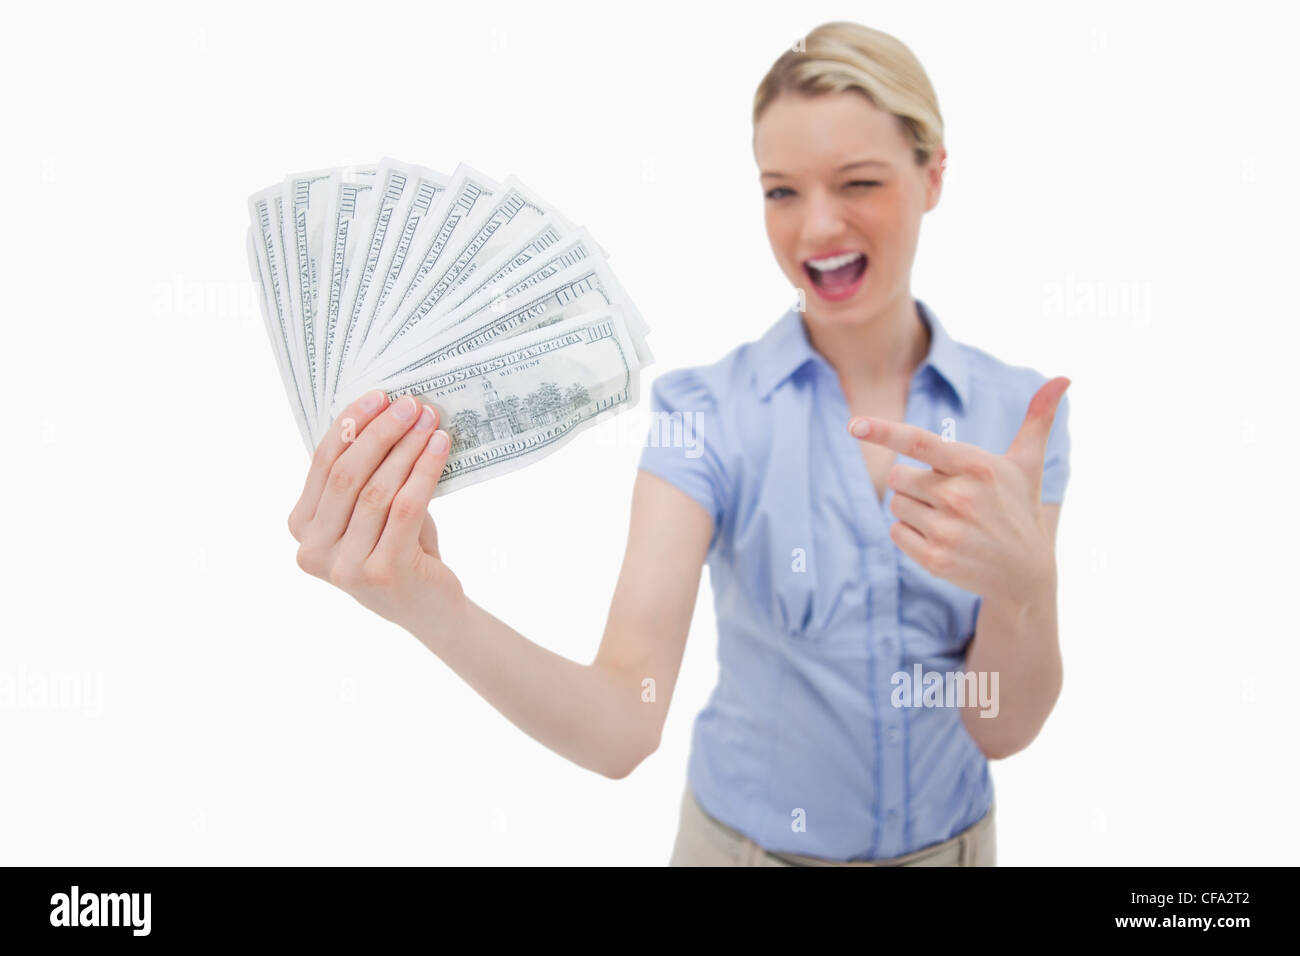 Woman holding money and pointing at it Stock Photo